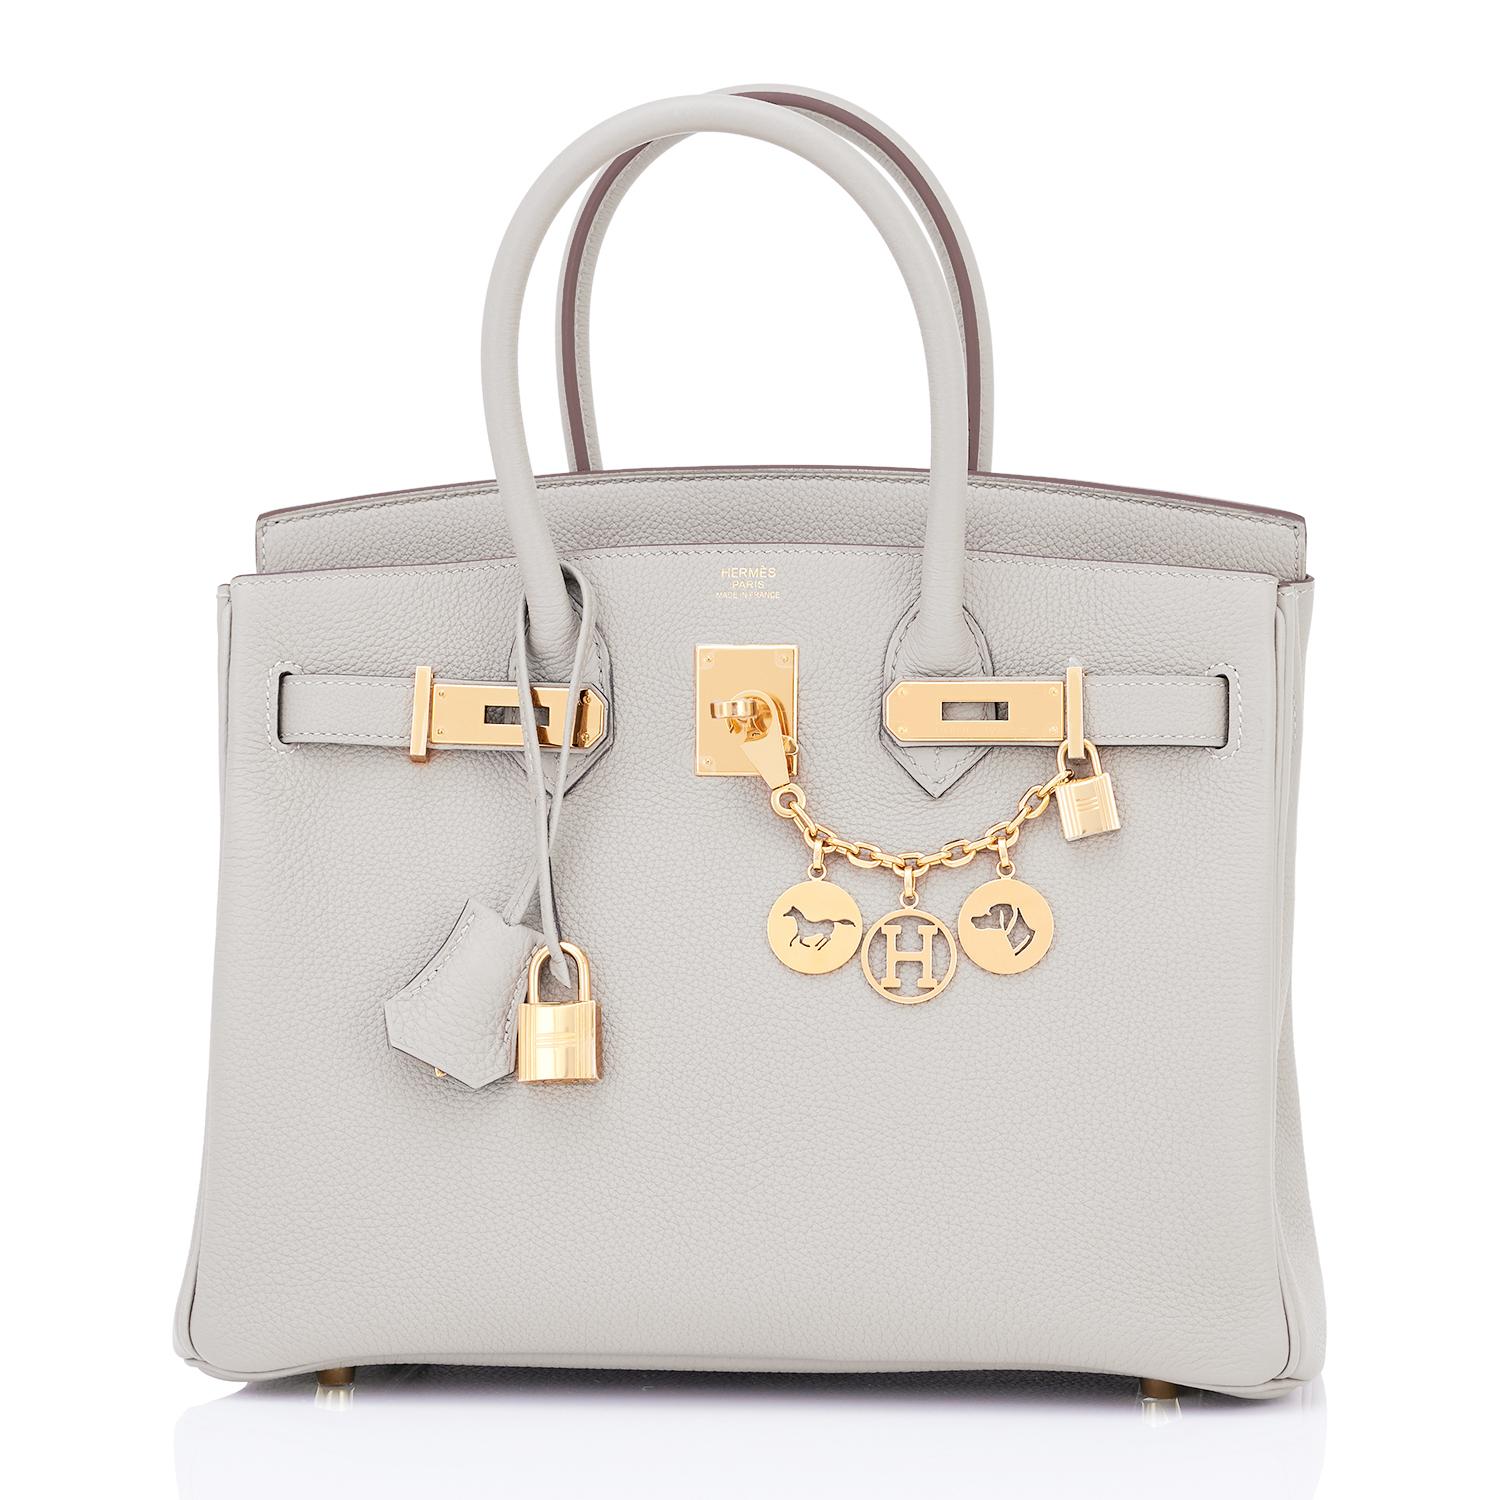 Chicjoy is pleased to present this Hermes Birkin 30cm Gris Perle Togo Bag Gold Hardware 
Brand New in Box in Store Fresh, Pristine Condition (with plastic on hardware)
Perfect Gift! Coming with keys, lock, clochette, a sleeper for the bag, rain